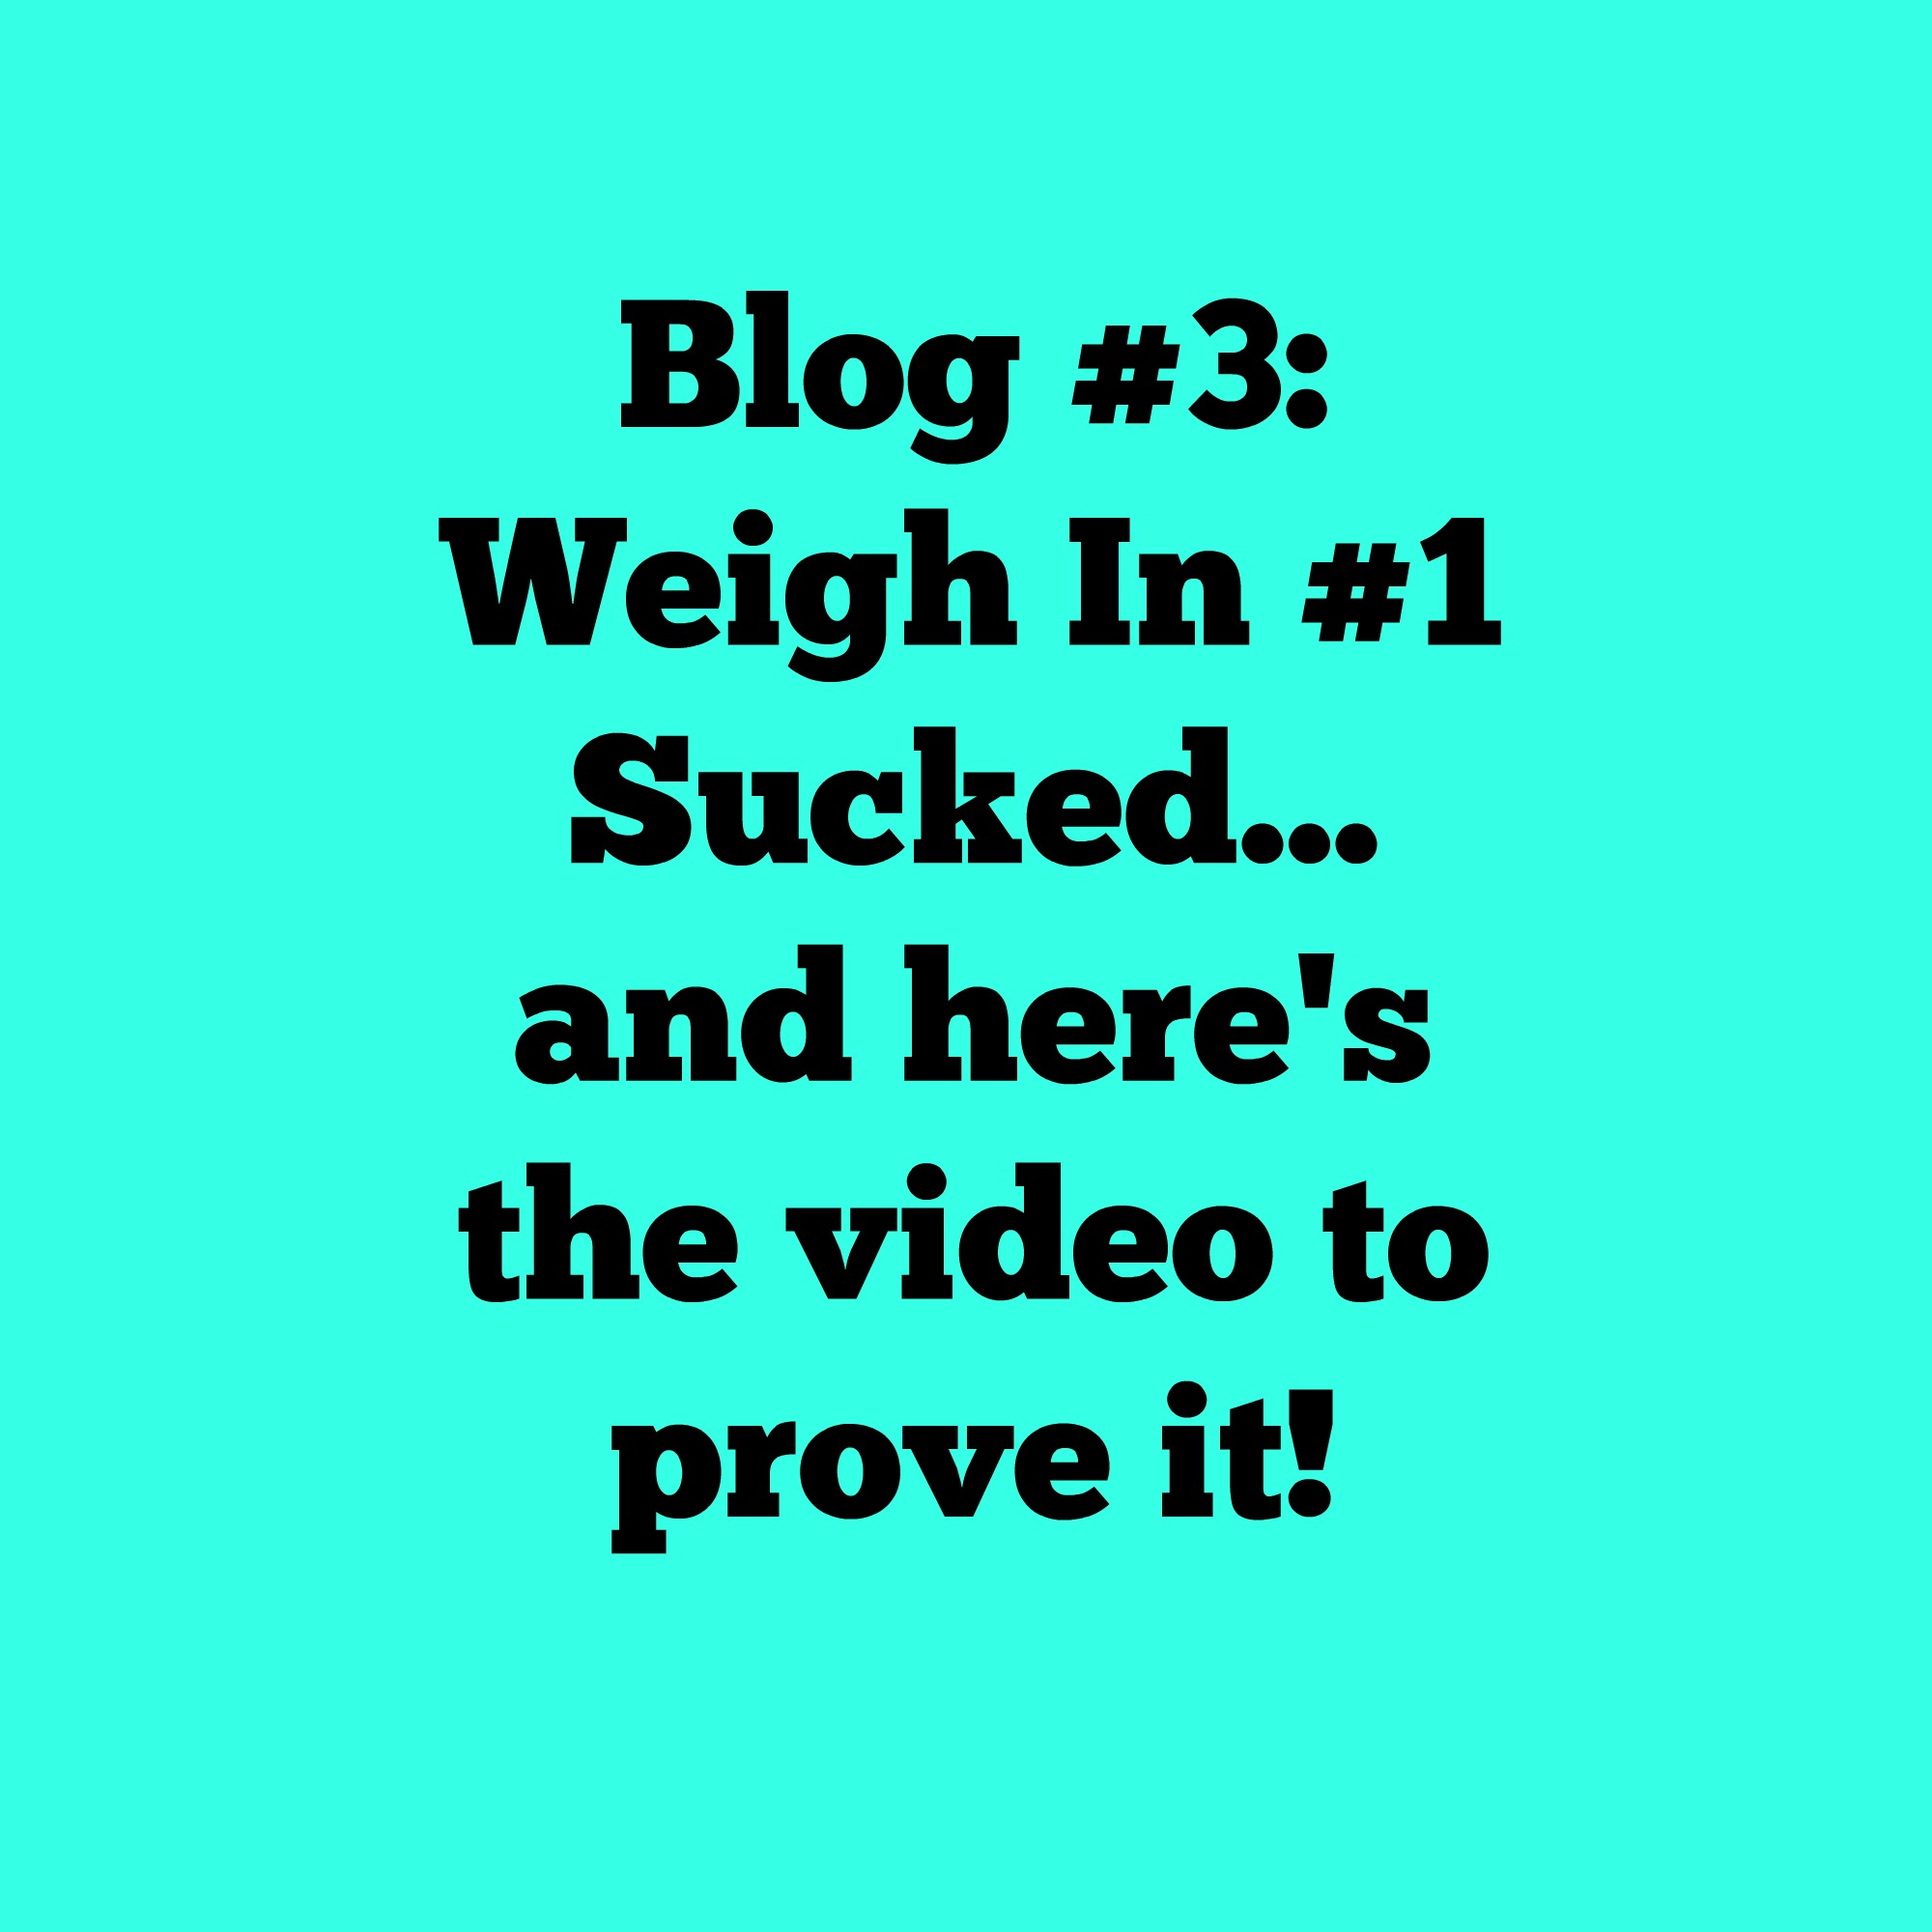 Weigh In #1 Sucked...Here's the video to prove it!